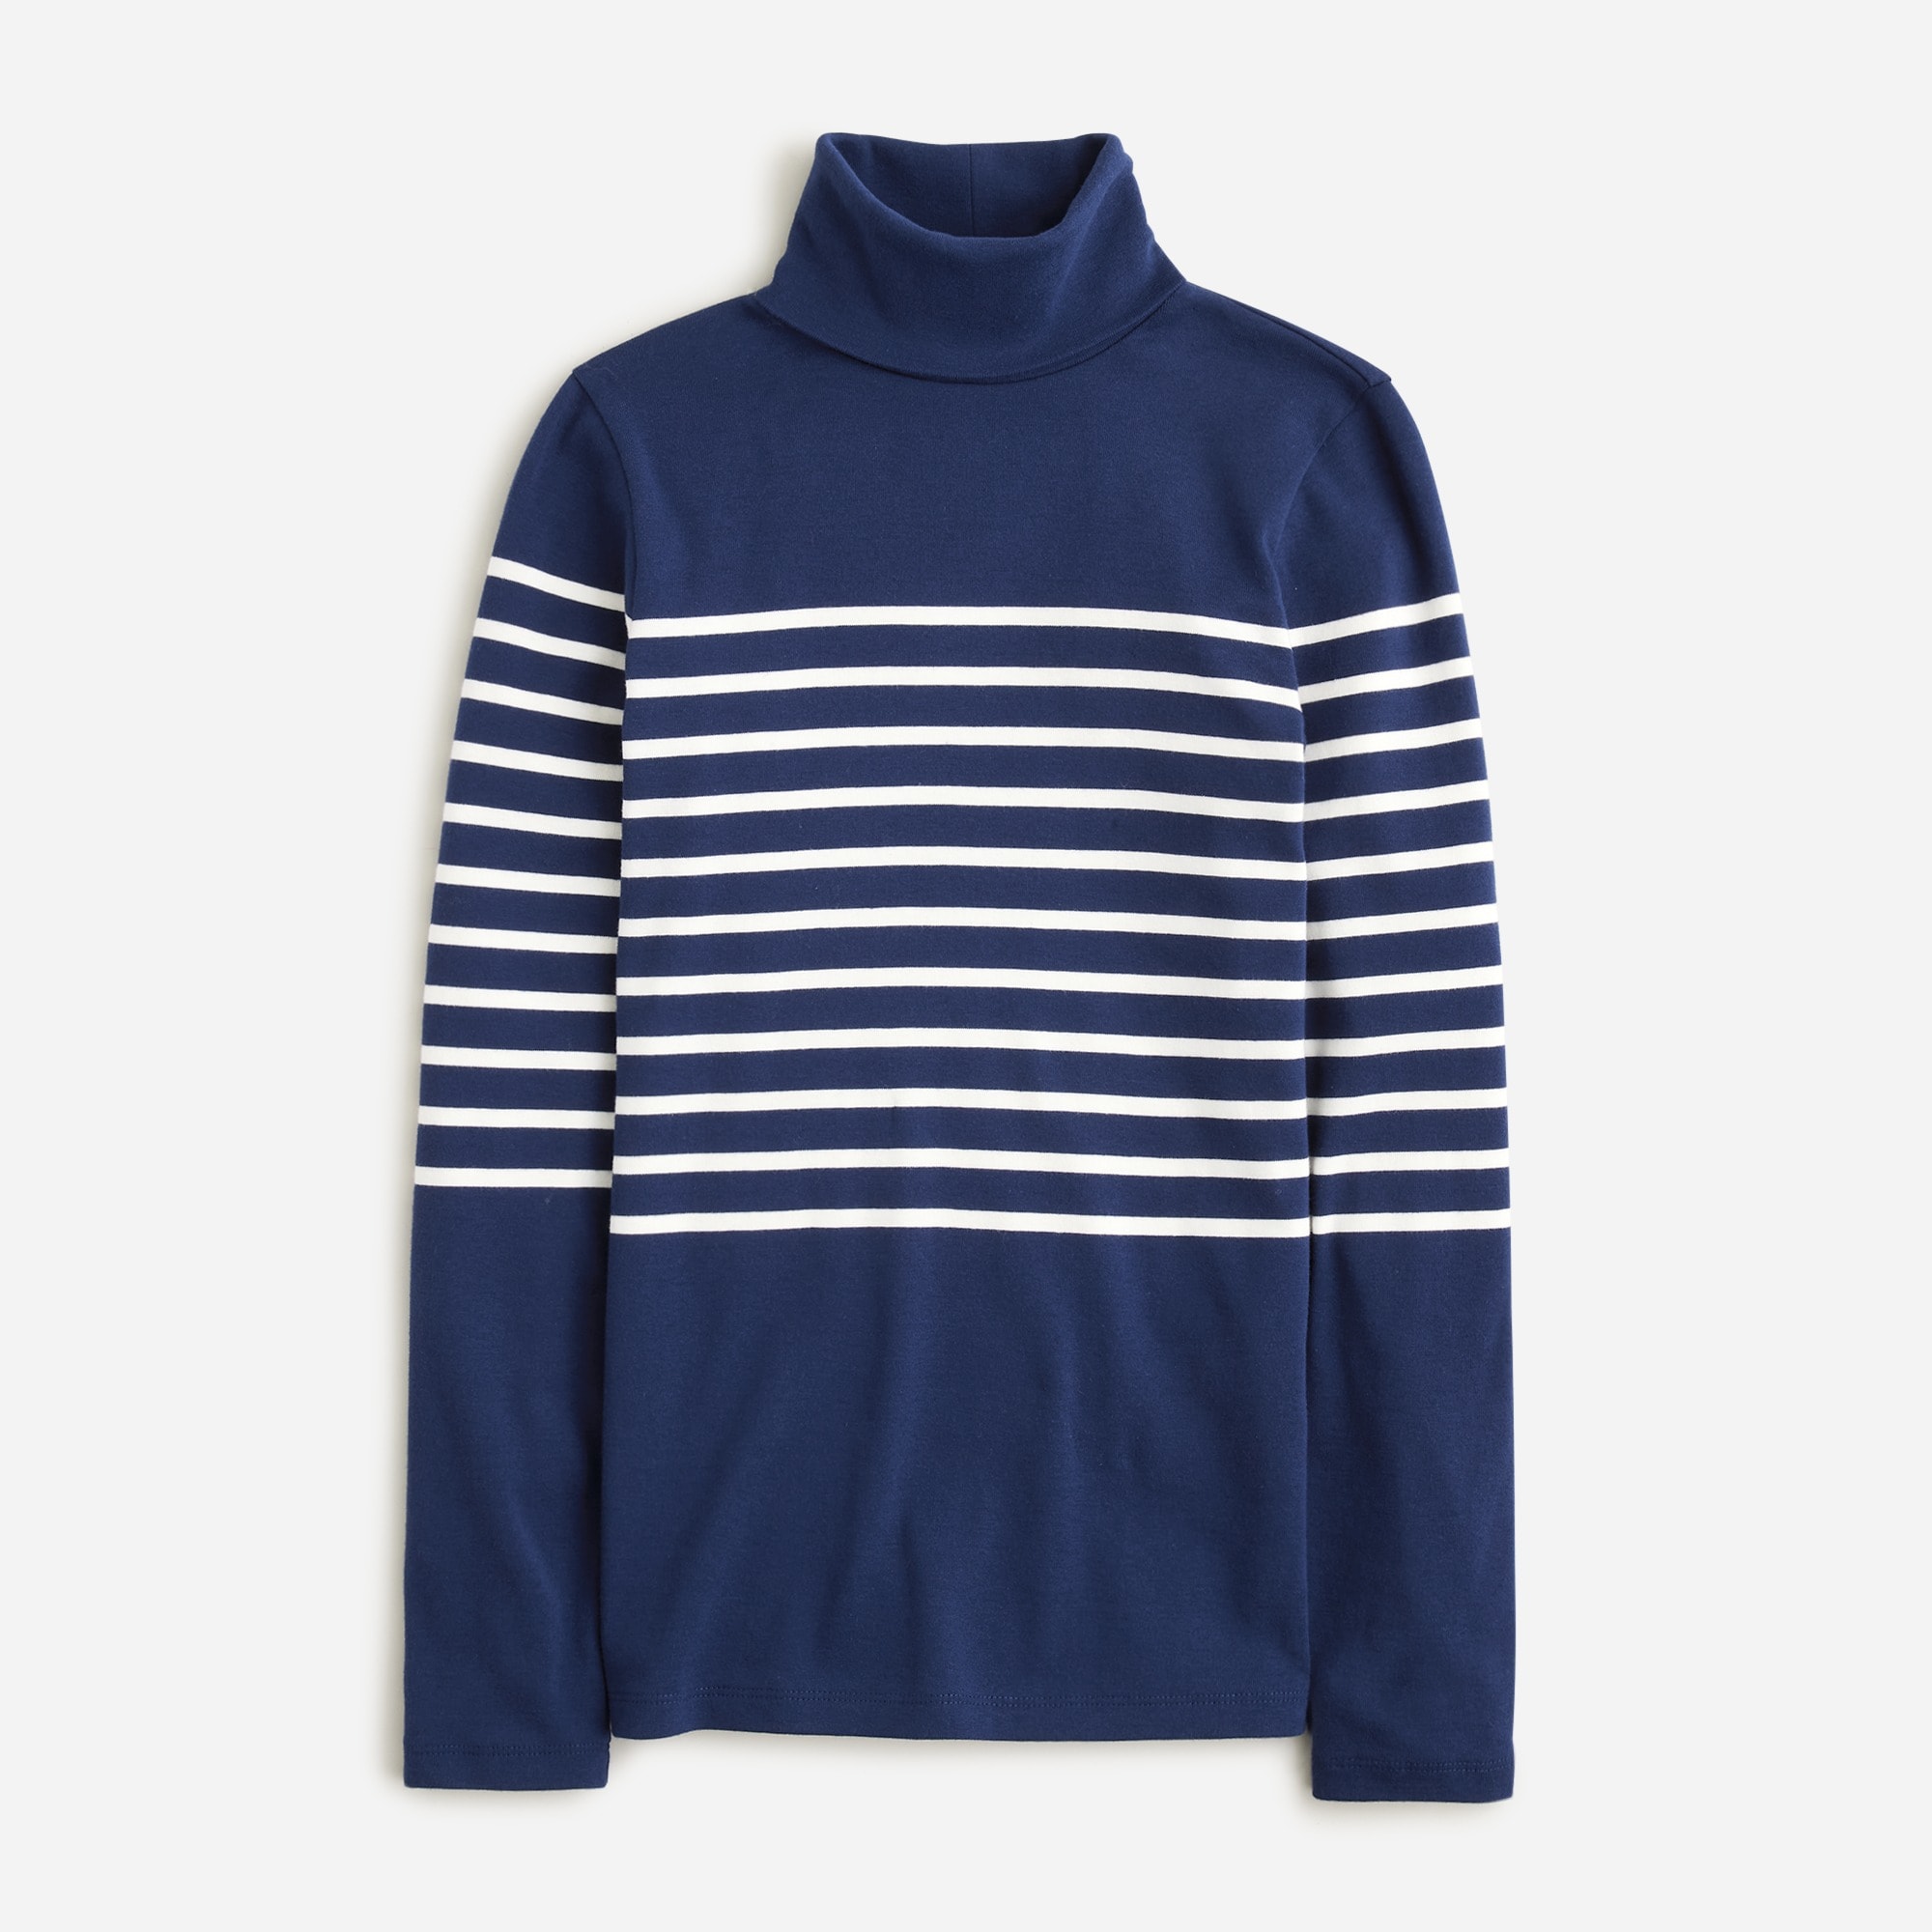  Perfect-fit turtleneck in stripe